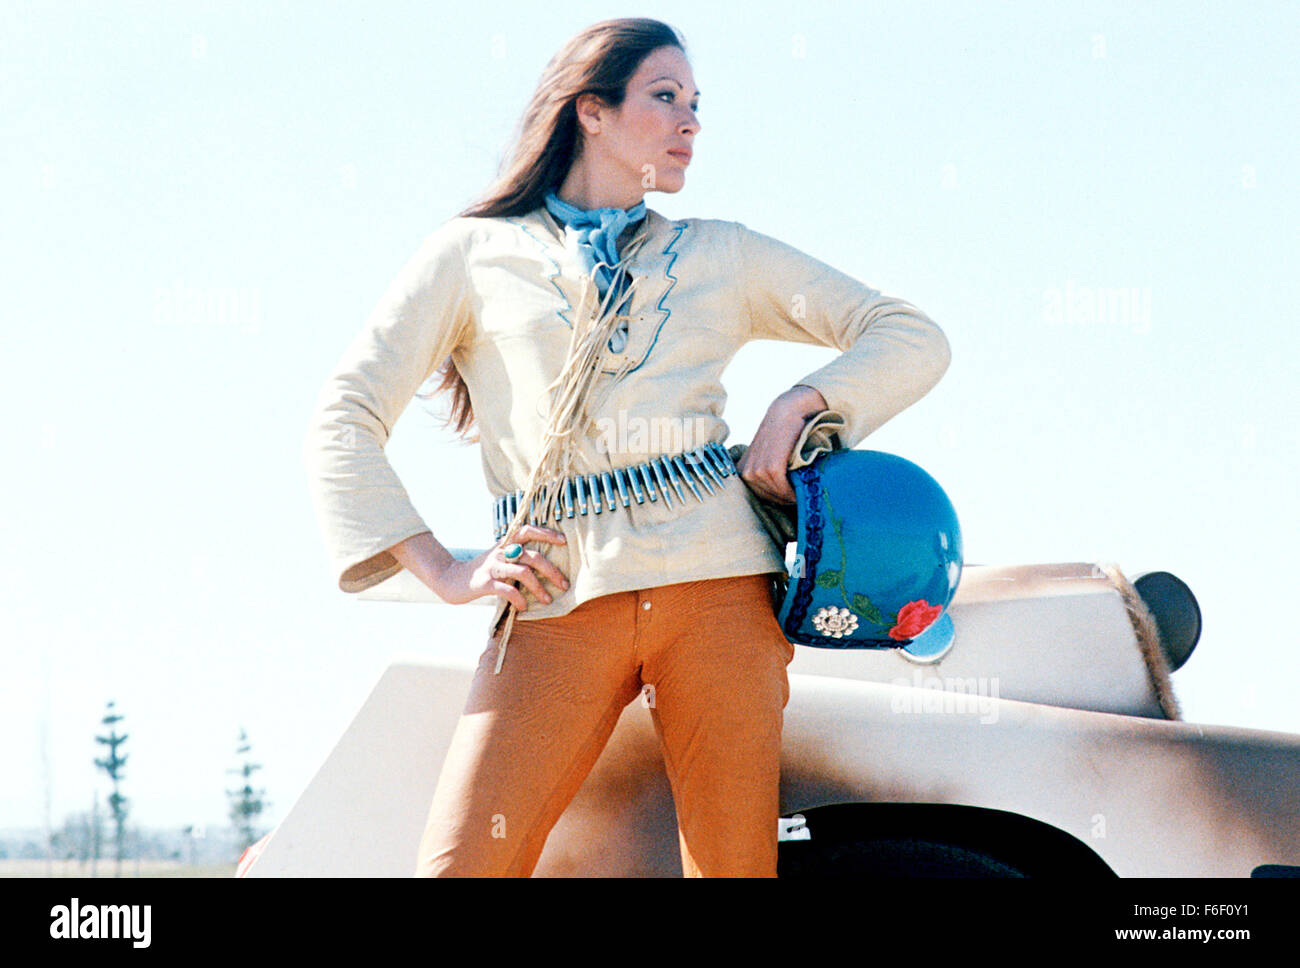 Apr 01, 1975; Los Angeles, CA, USA; MARY WORONOV as Calamity Jane in the action, sport, sci-fi film 'Death Race 2000' directed by Paul Bartel. Stock Photo